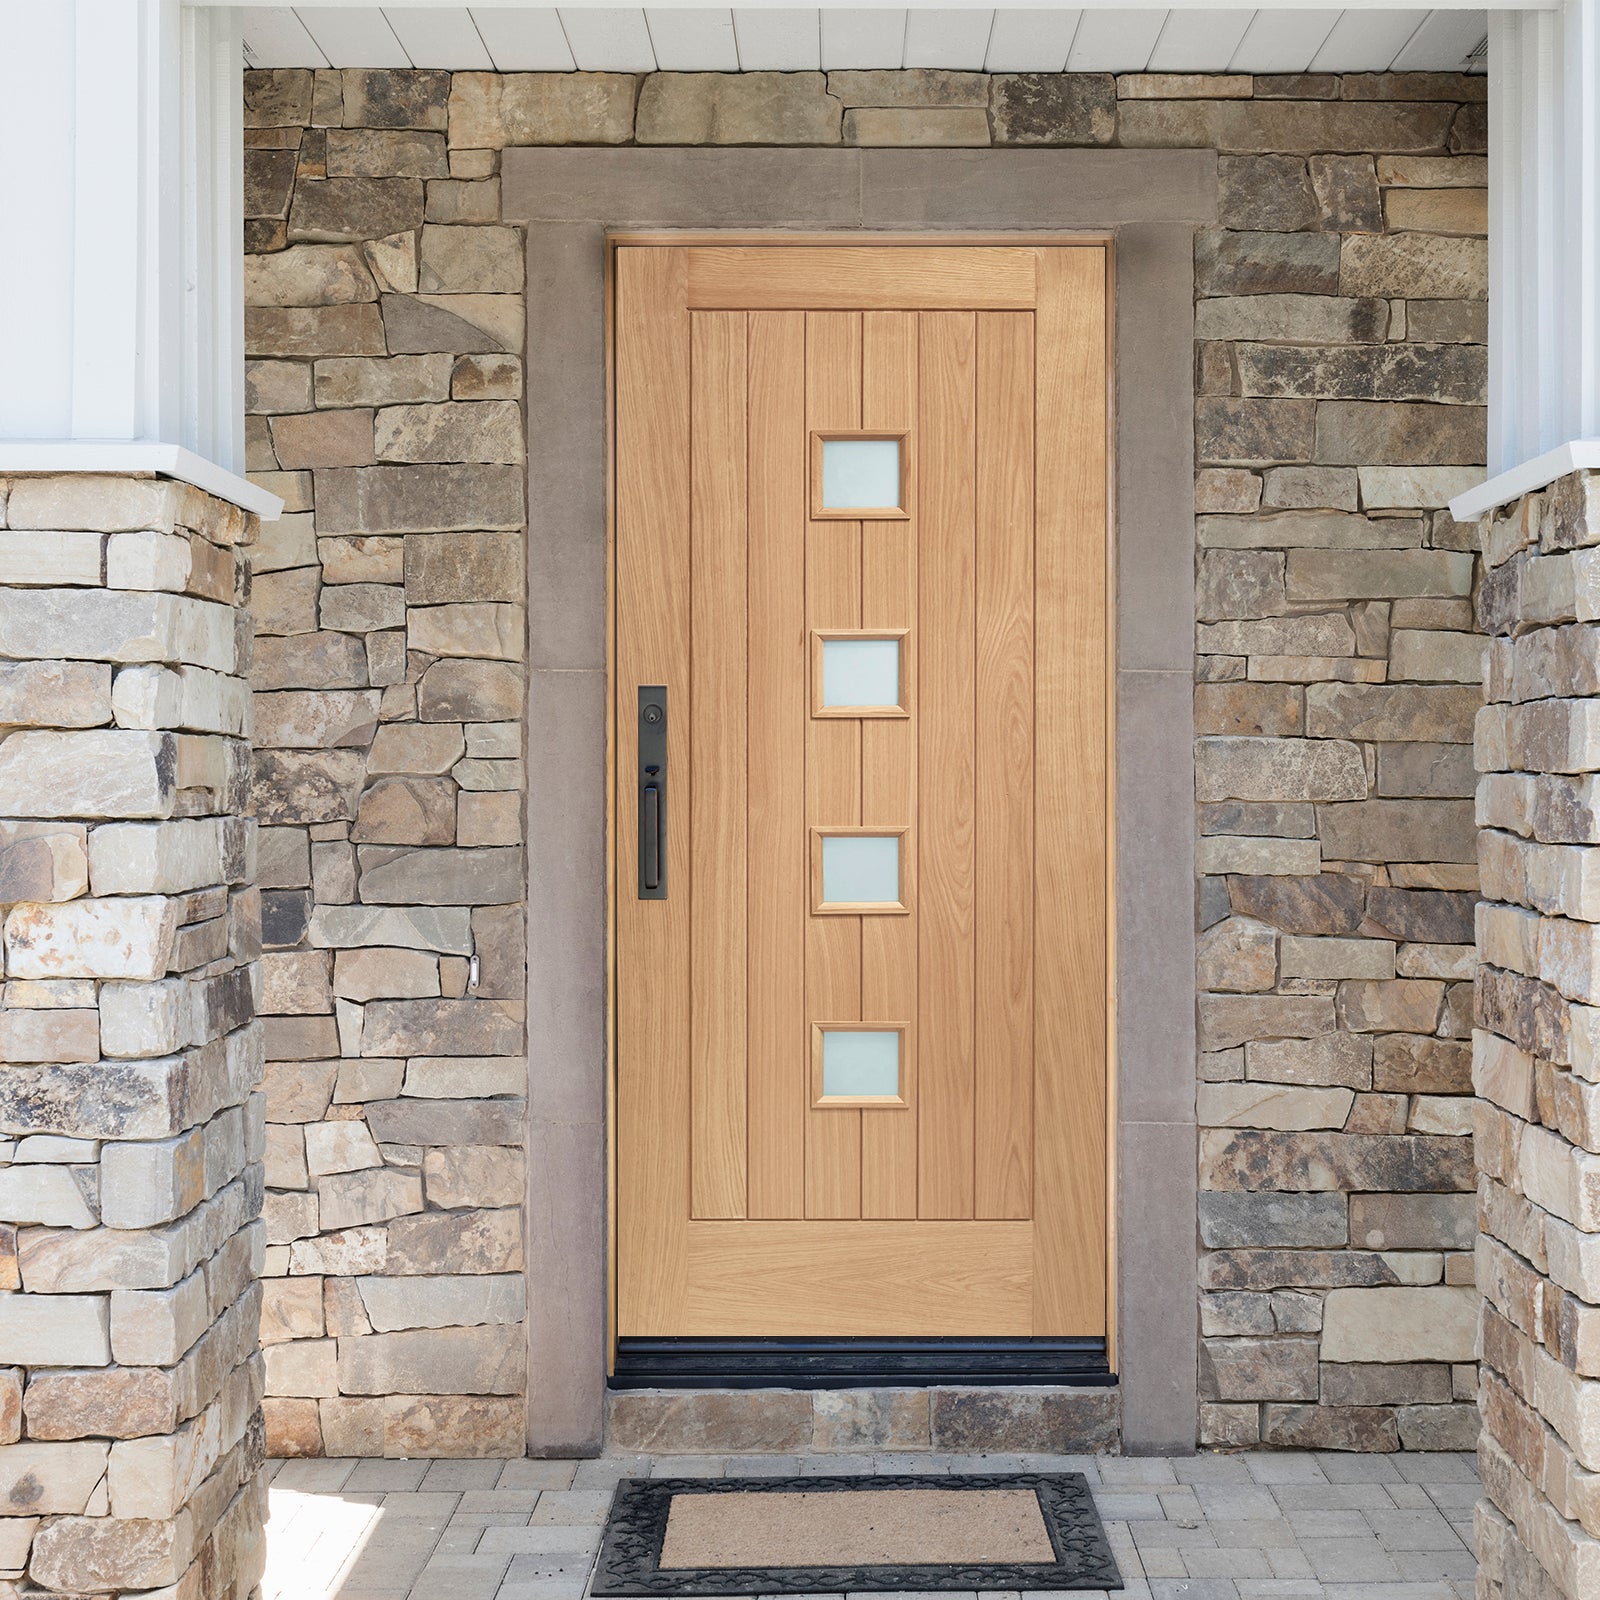 SHOW External Oak Siena M&T Door with Double Glazed Obscure Glass lifestyle